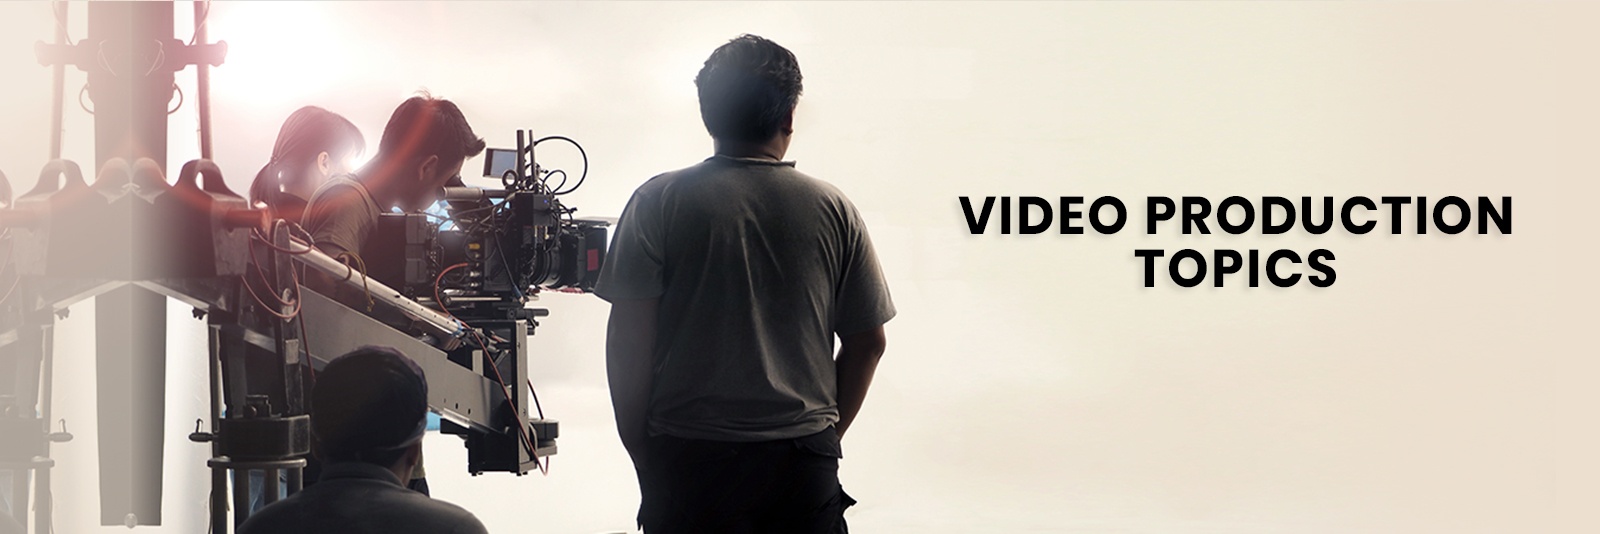 Video Production Topics - Video Production Services Vancouver by Tetra Films